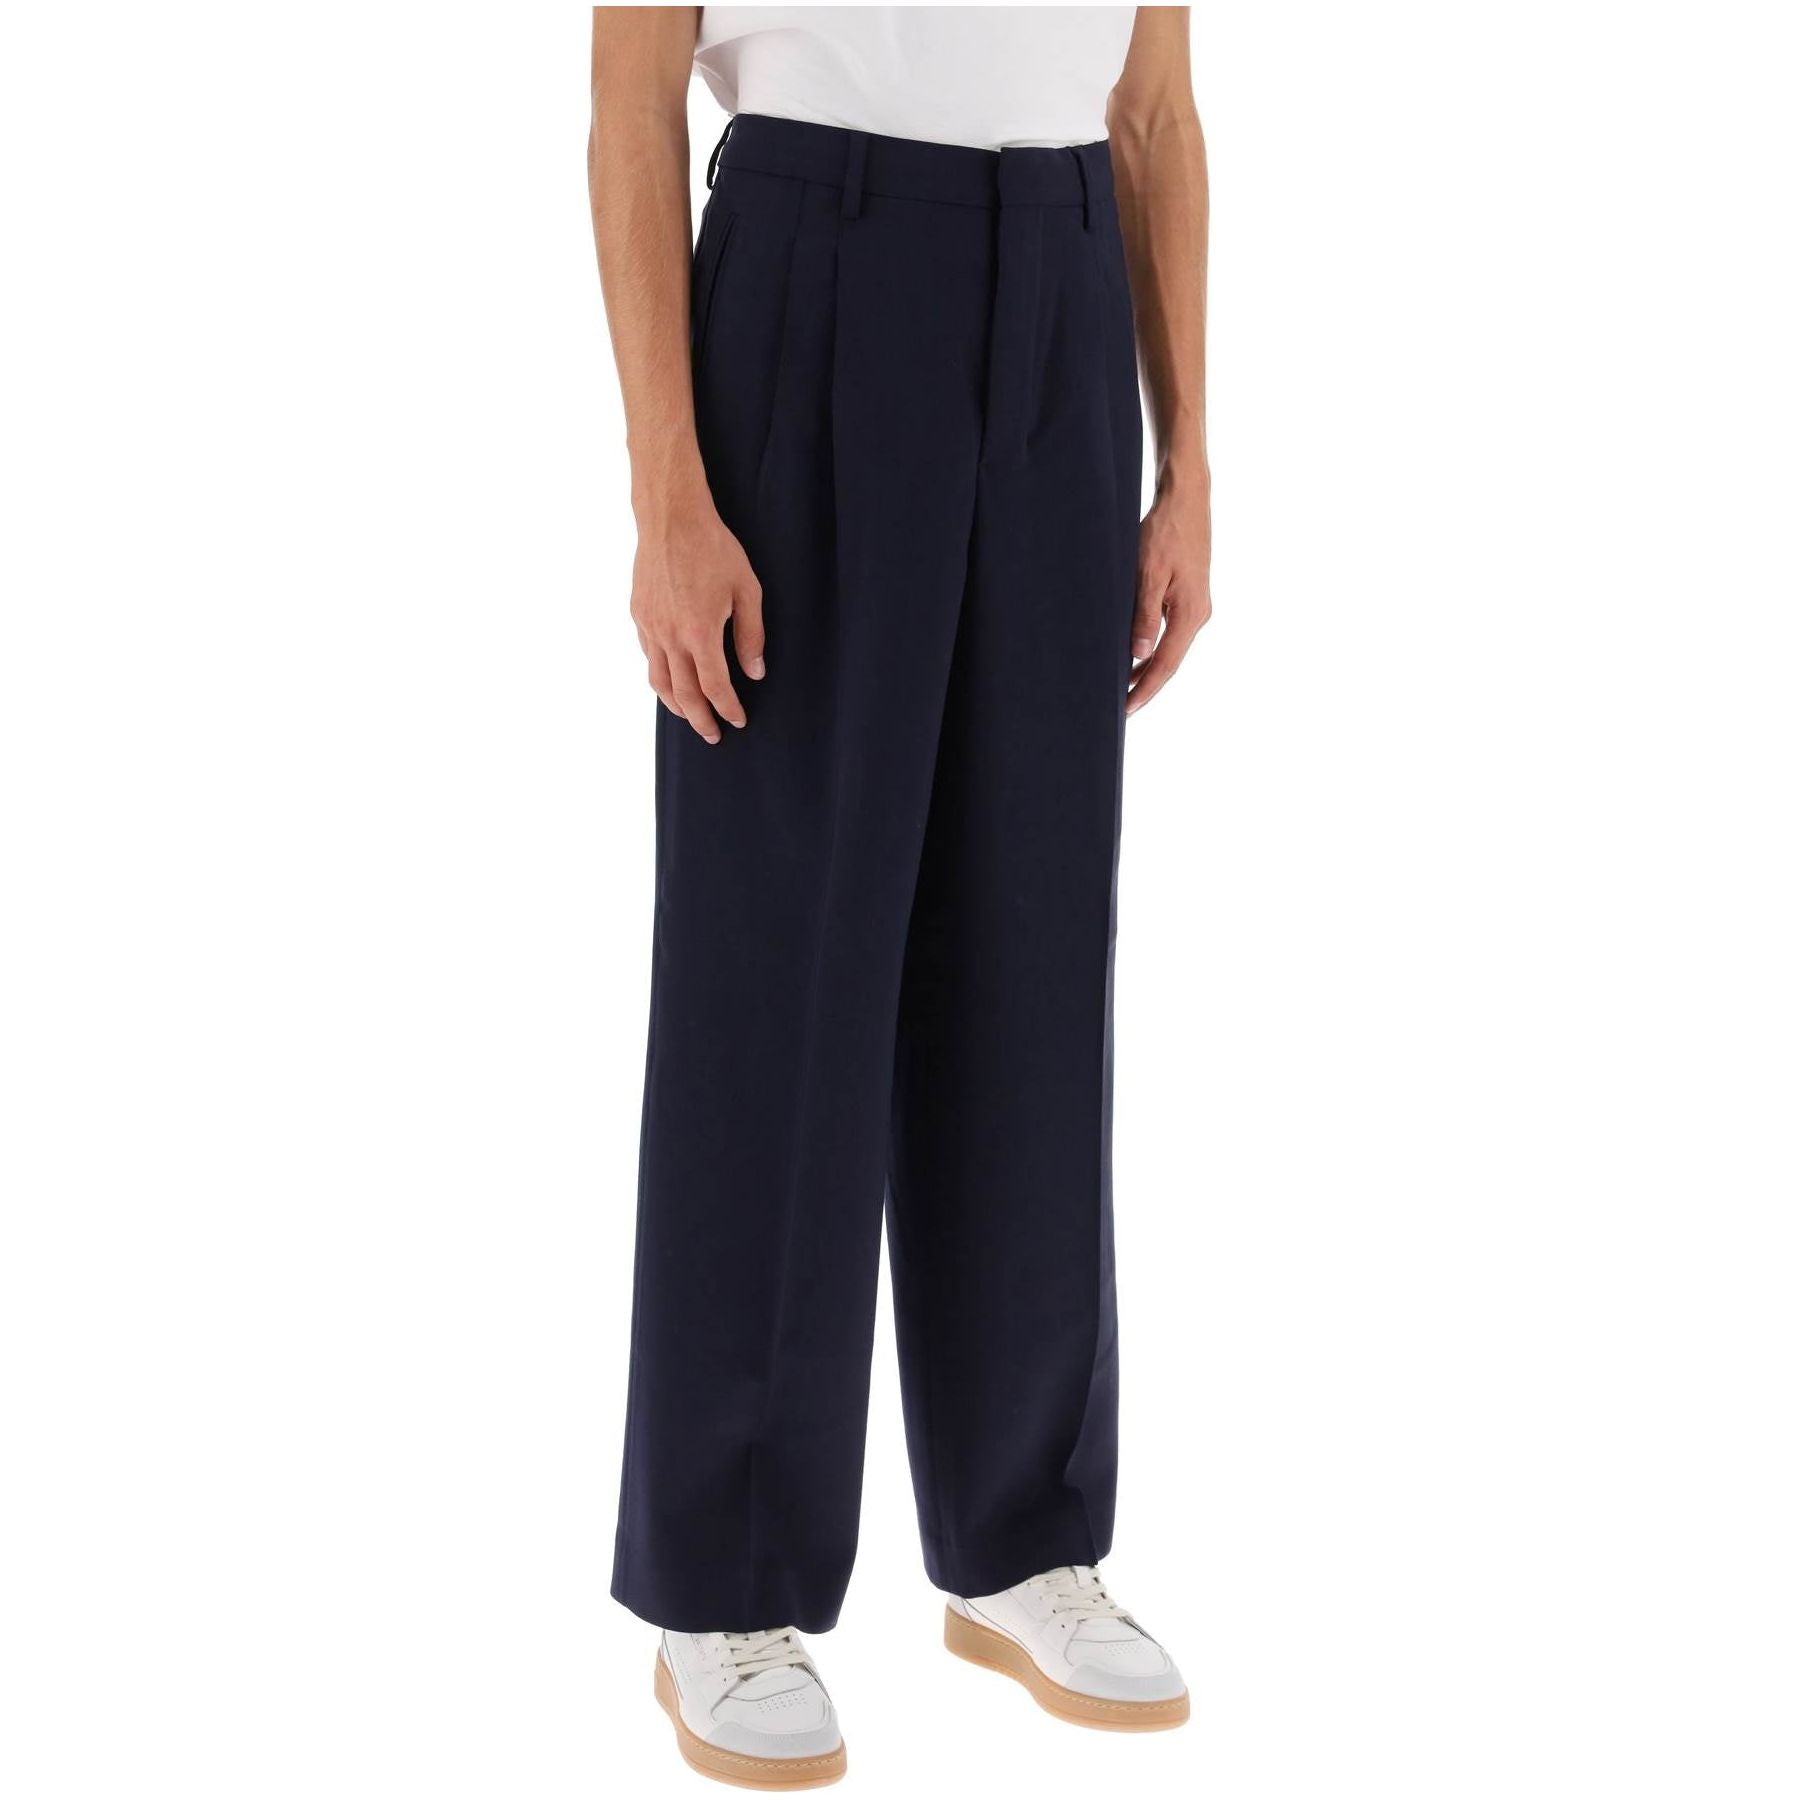 Virgin Wool Blend Loose Fit Pants with Straight Cut